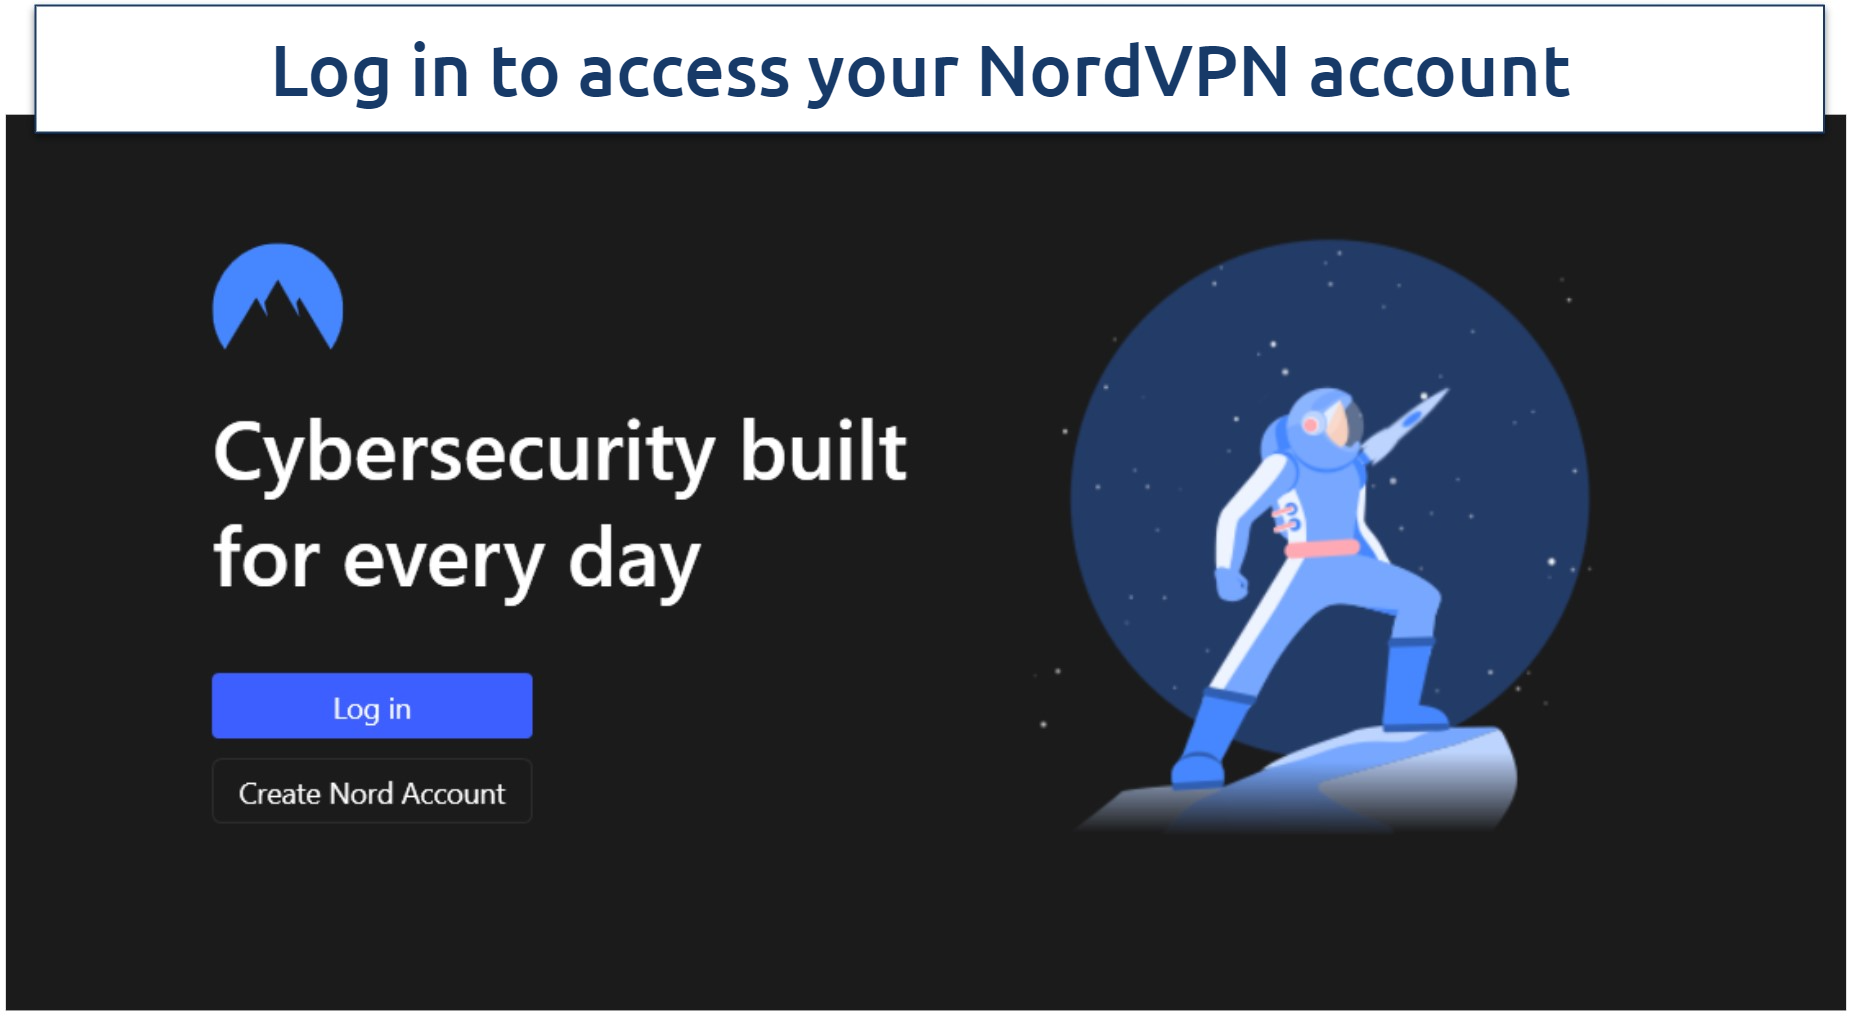 Image showing how to proceed to the NordVPN login page